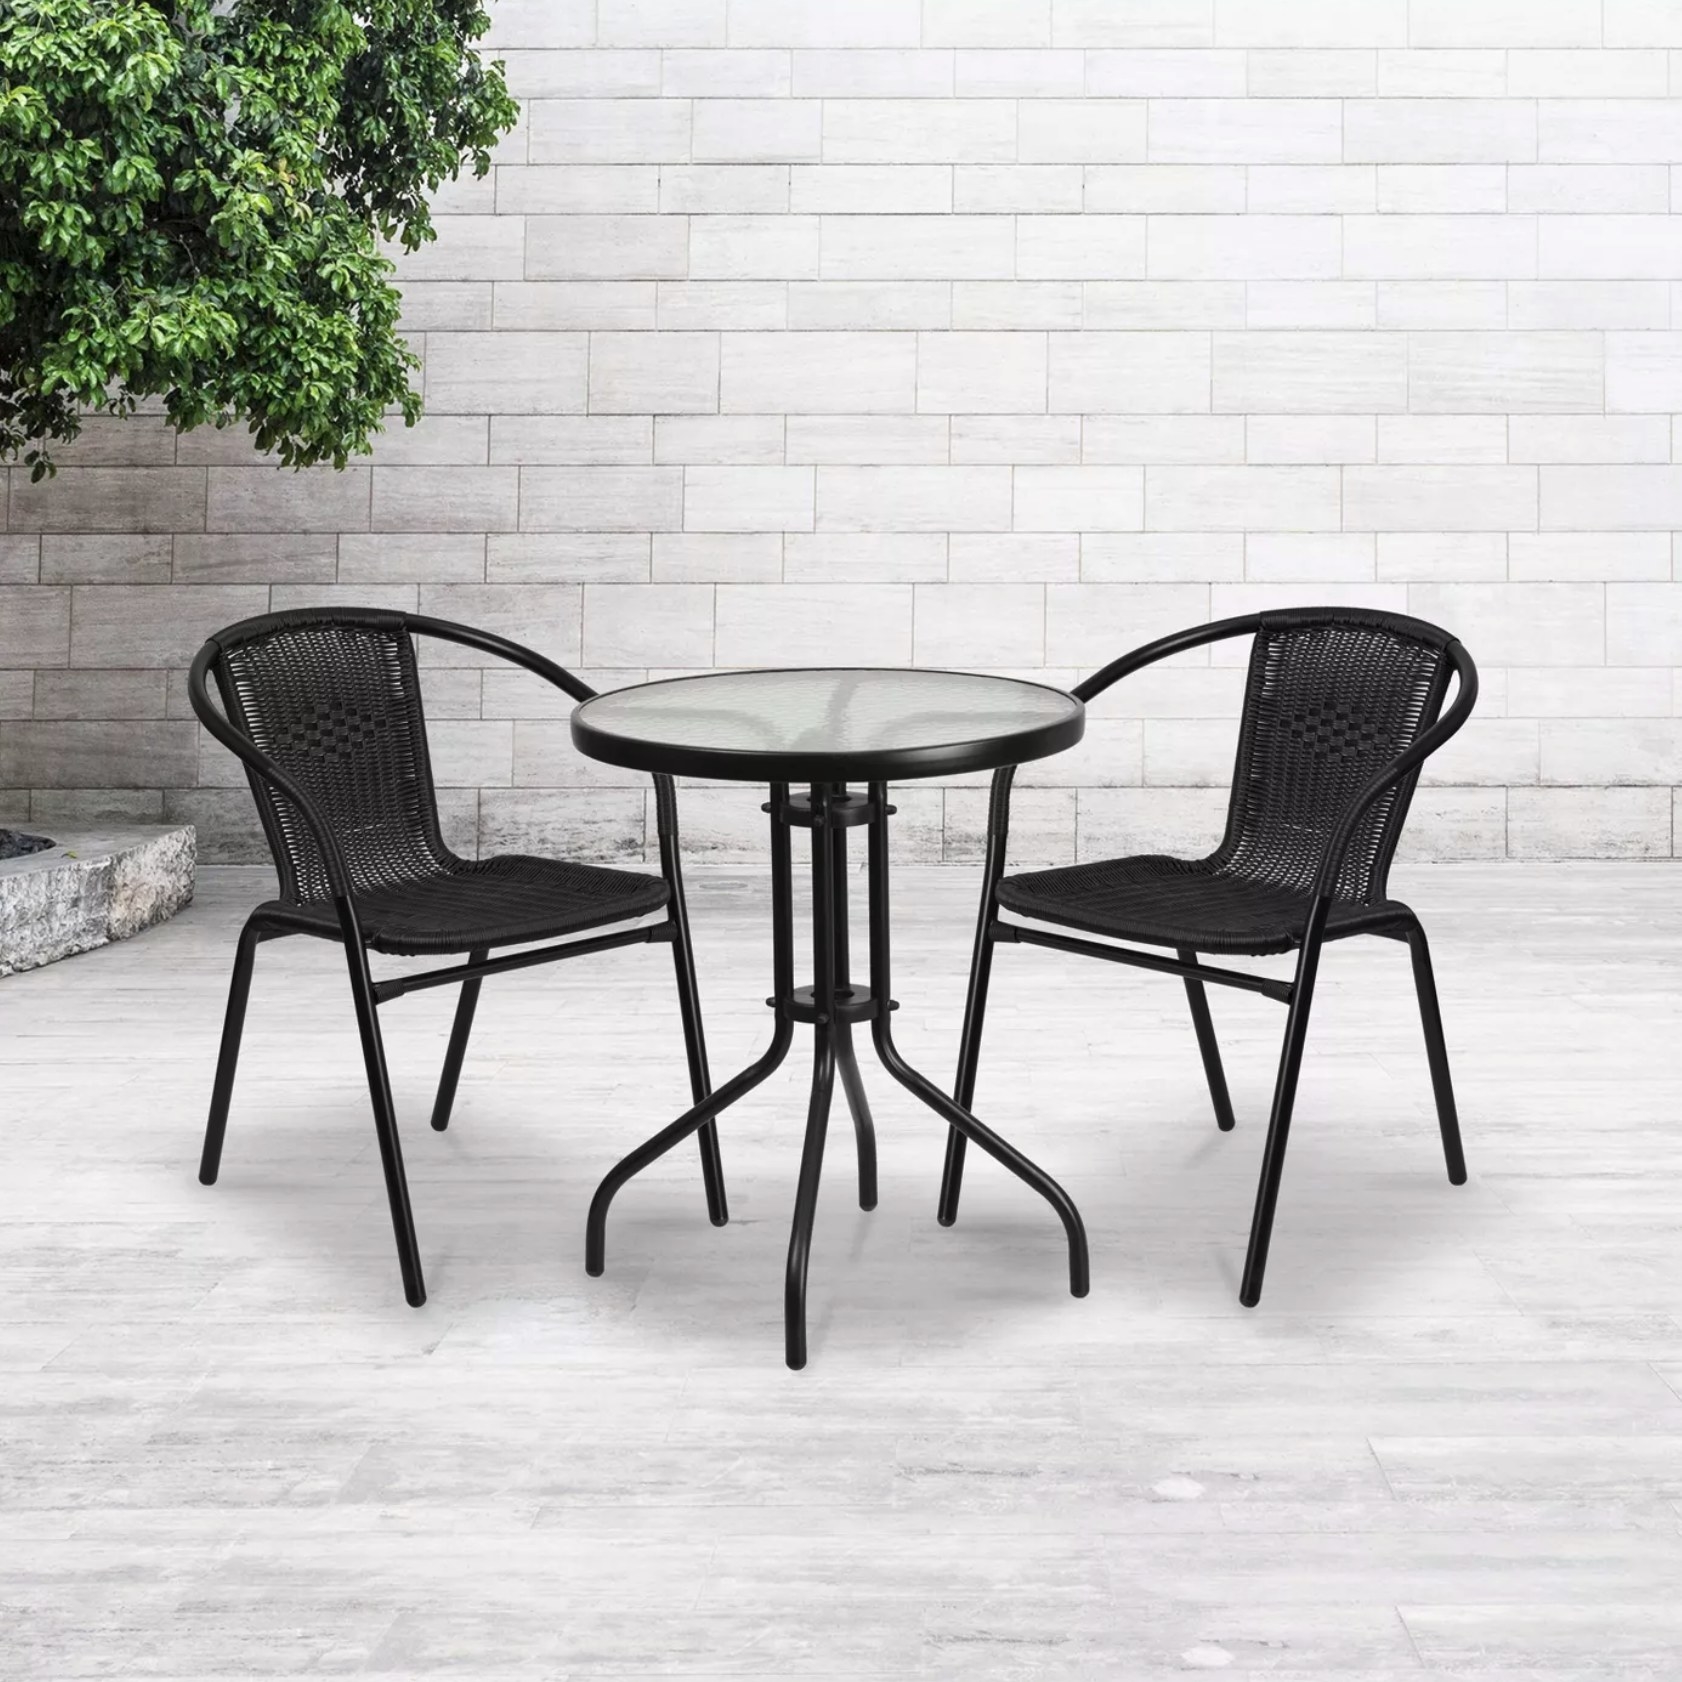 A pair of black rattan armchairs in a tiled outdoor space with a small table